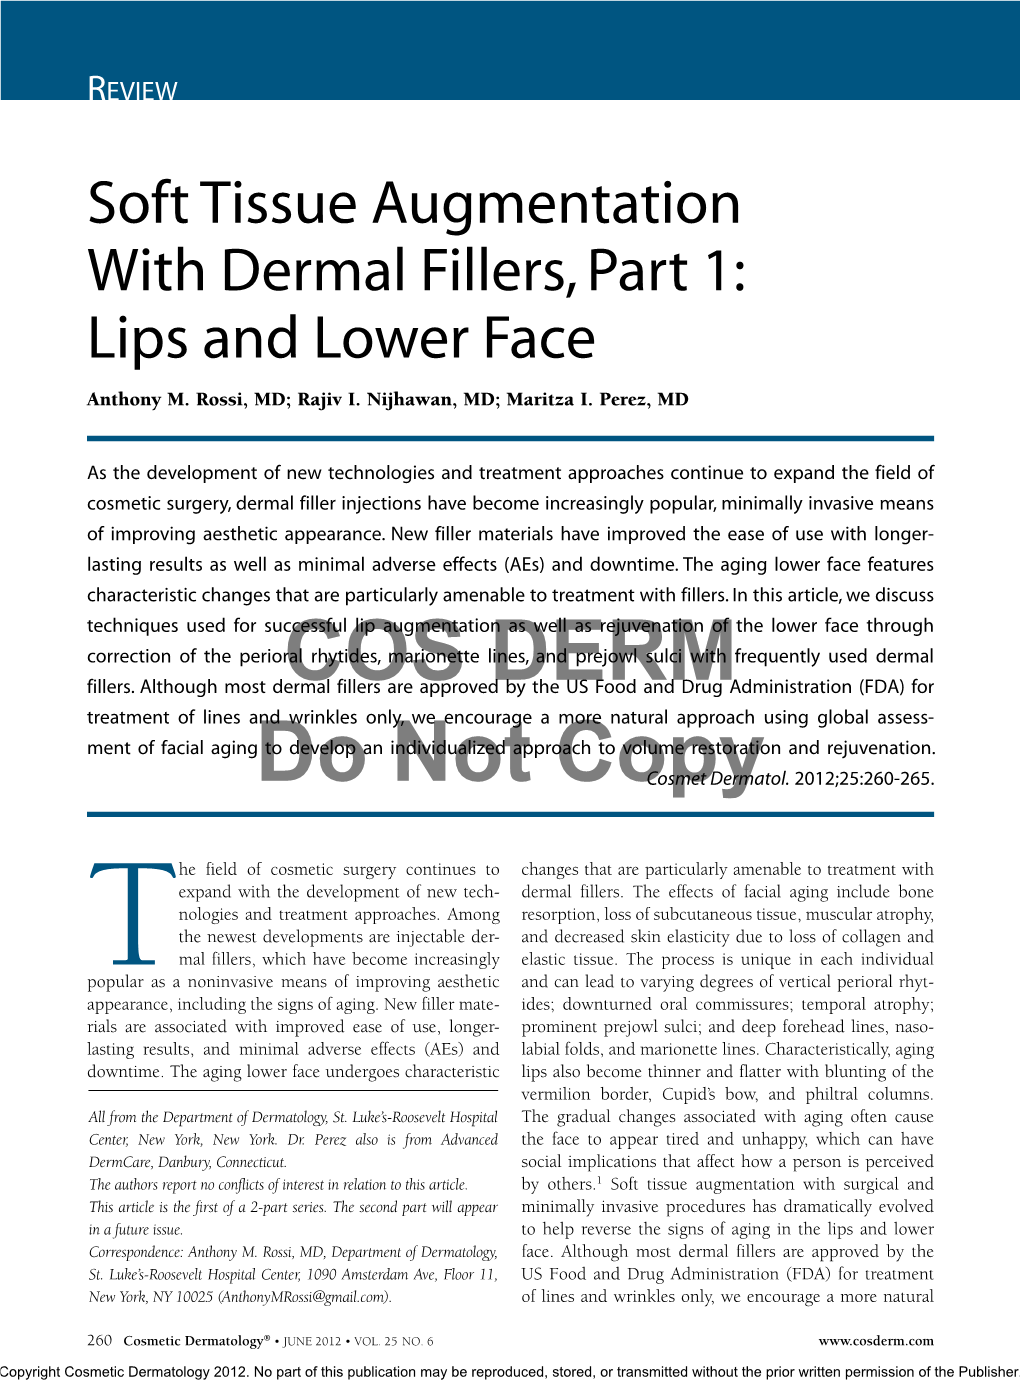 Soft Tissue Augmentation with Dermal Fillers, Part 1: Lips and Lower Face Anthony M